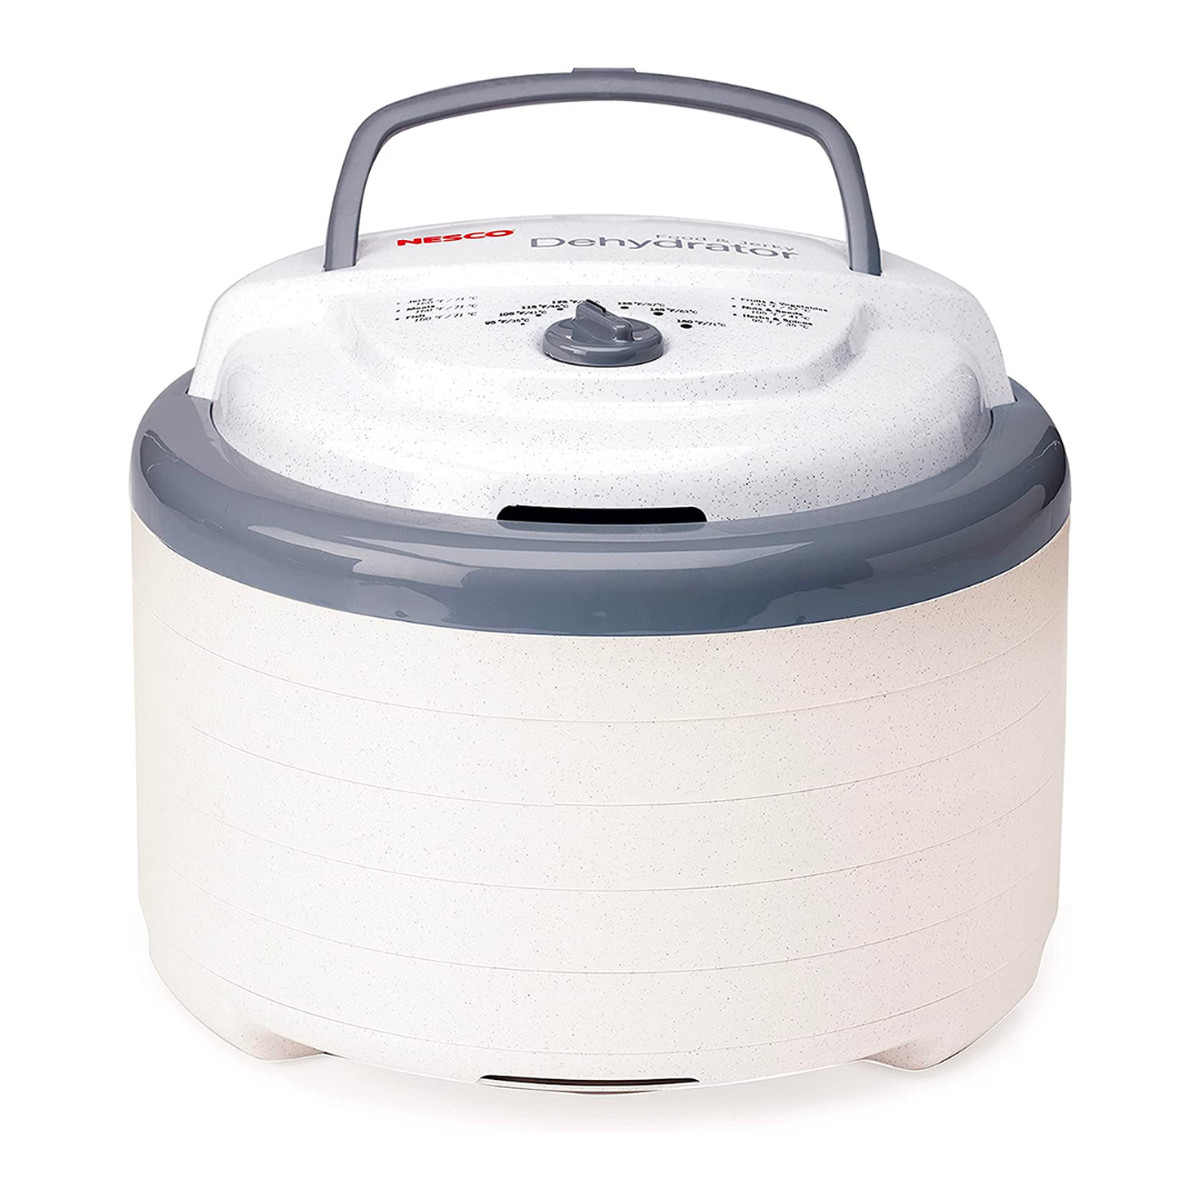 White NESCO food dehydrator with dial control and lid handle